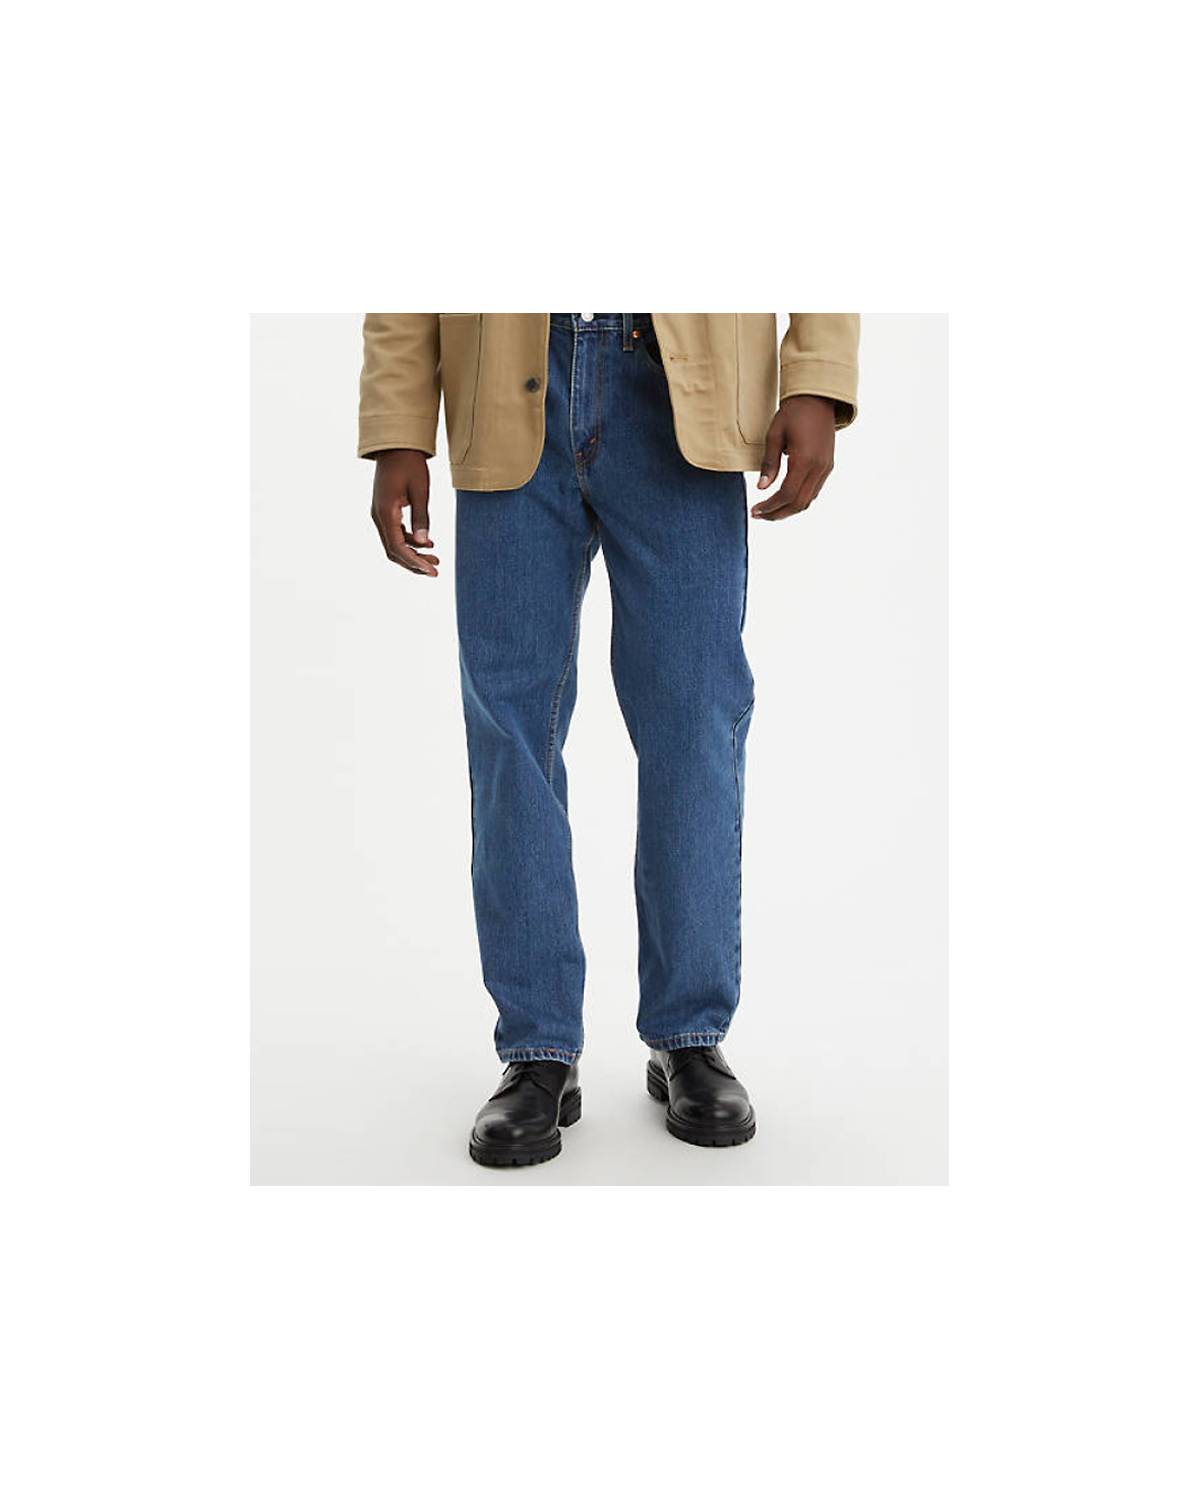 Man in relaxed jeans